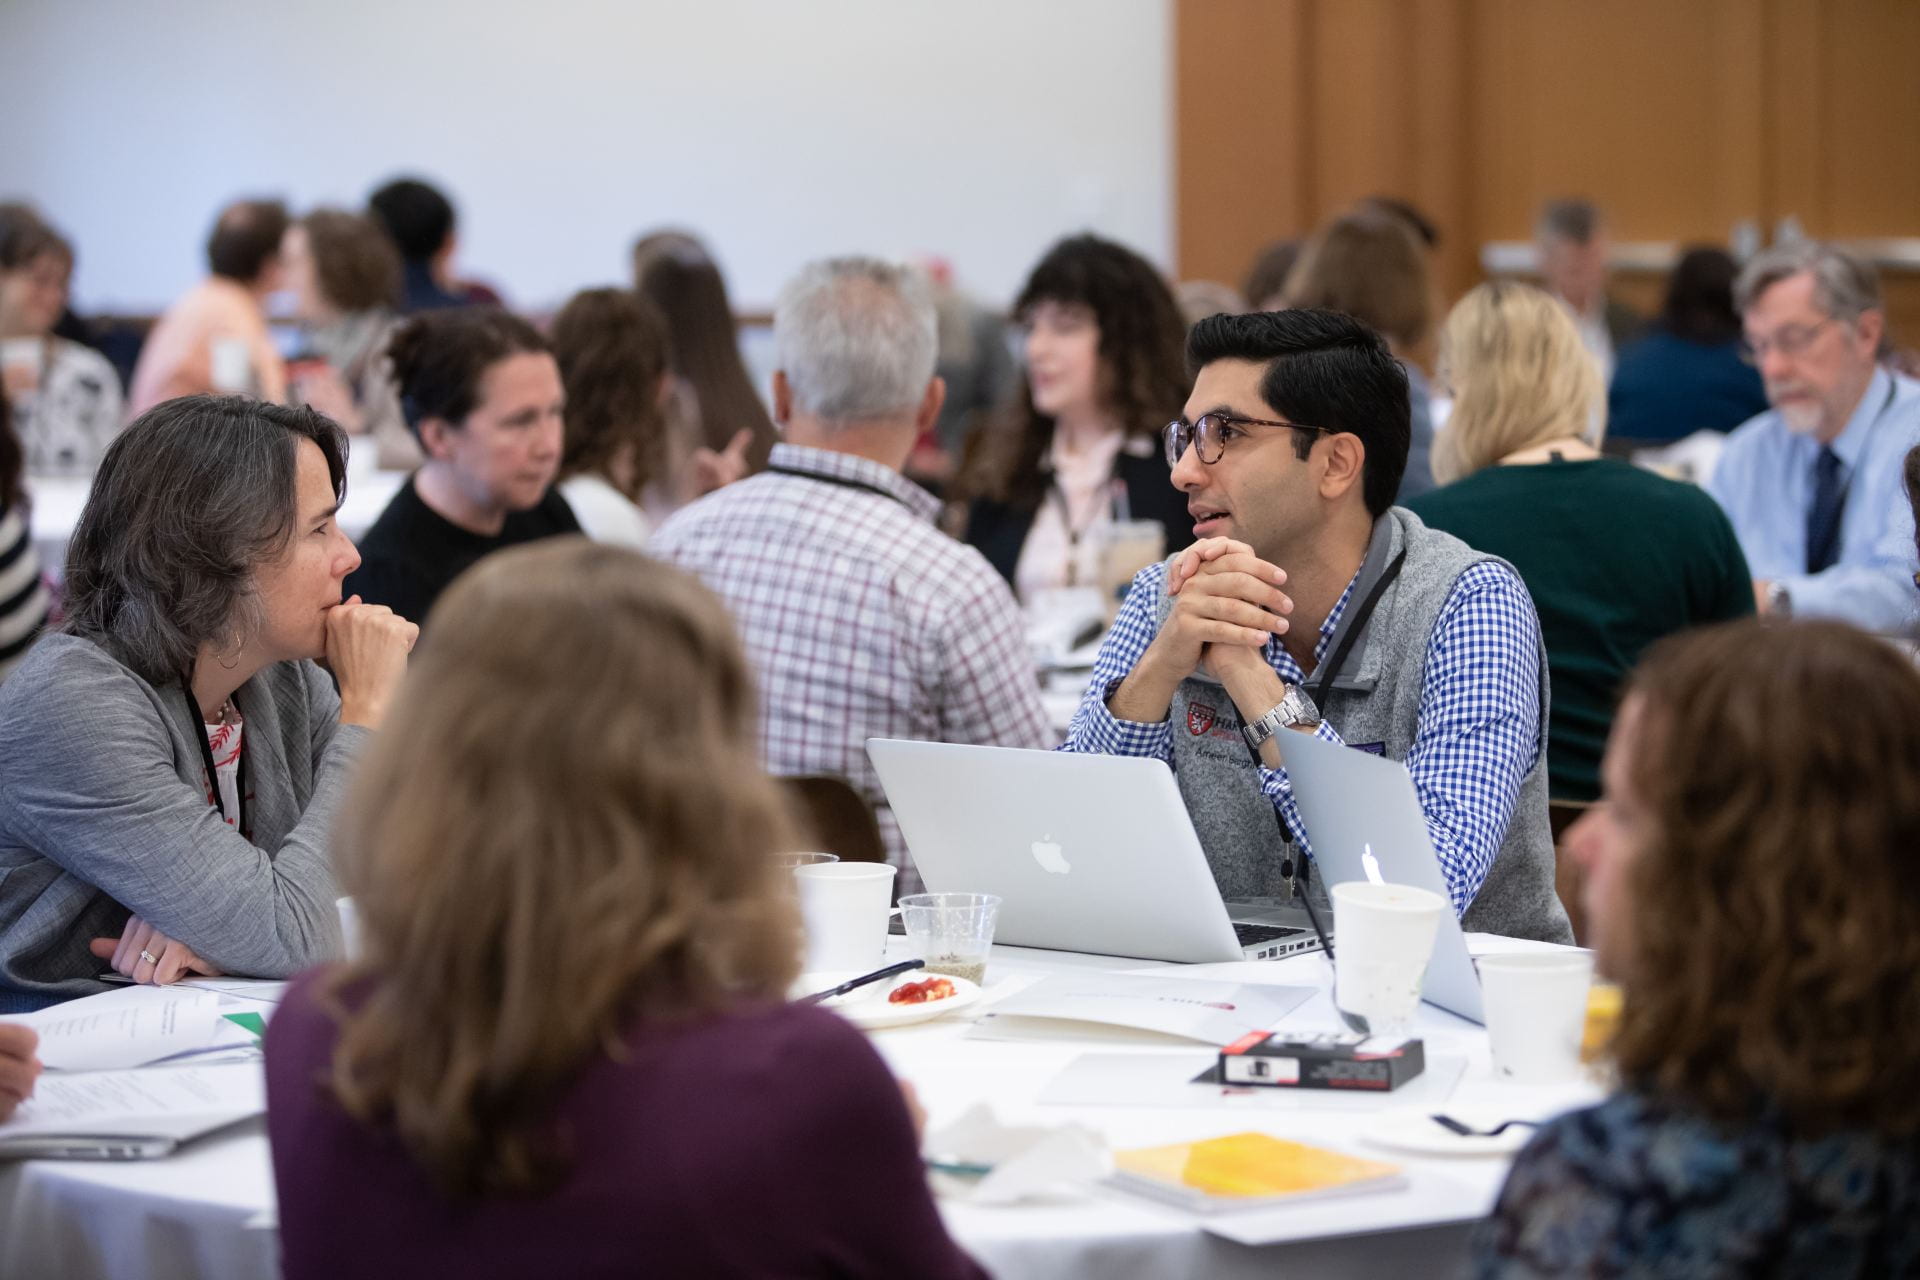 Attendees at 2019 HILT Conference speak at round tables.